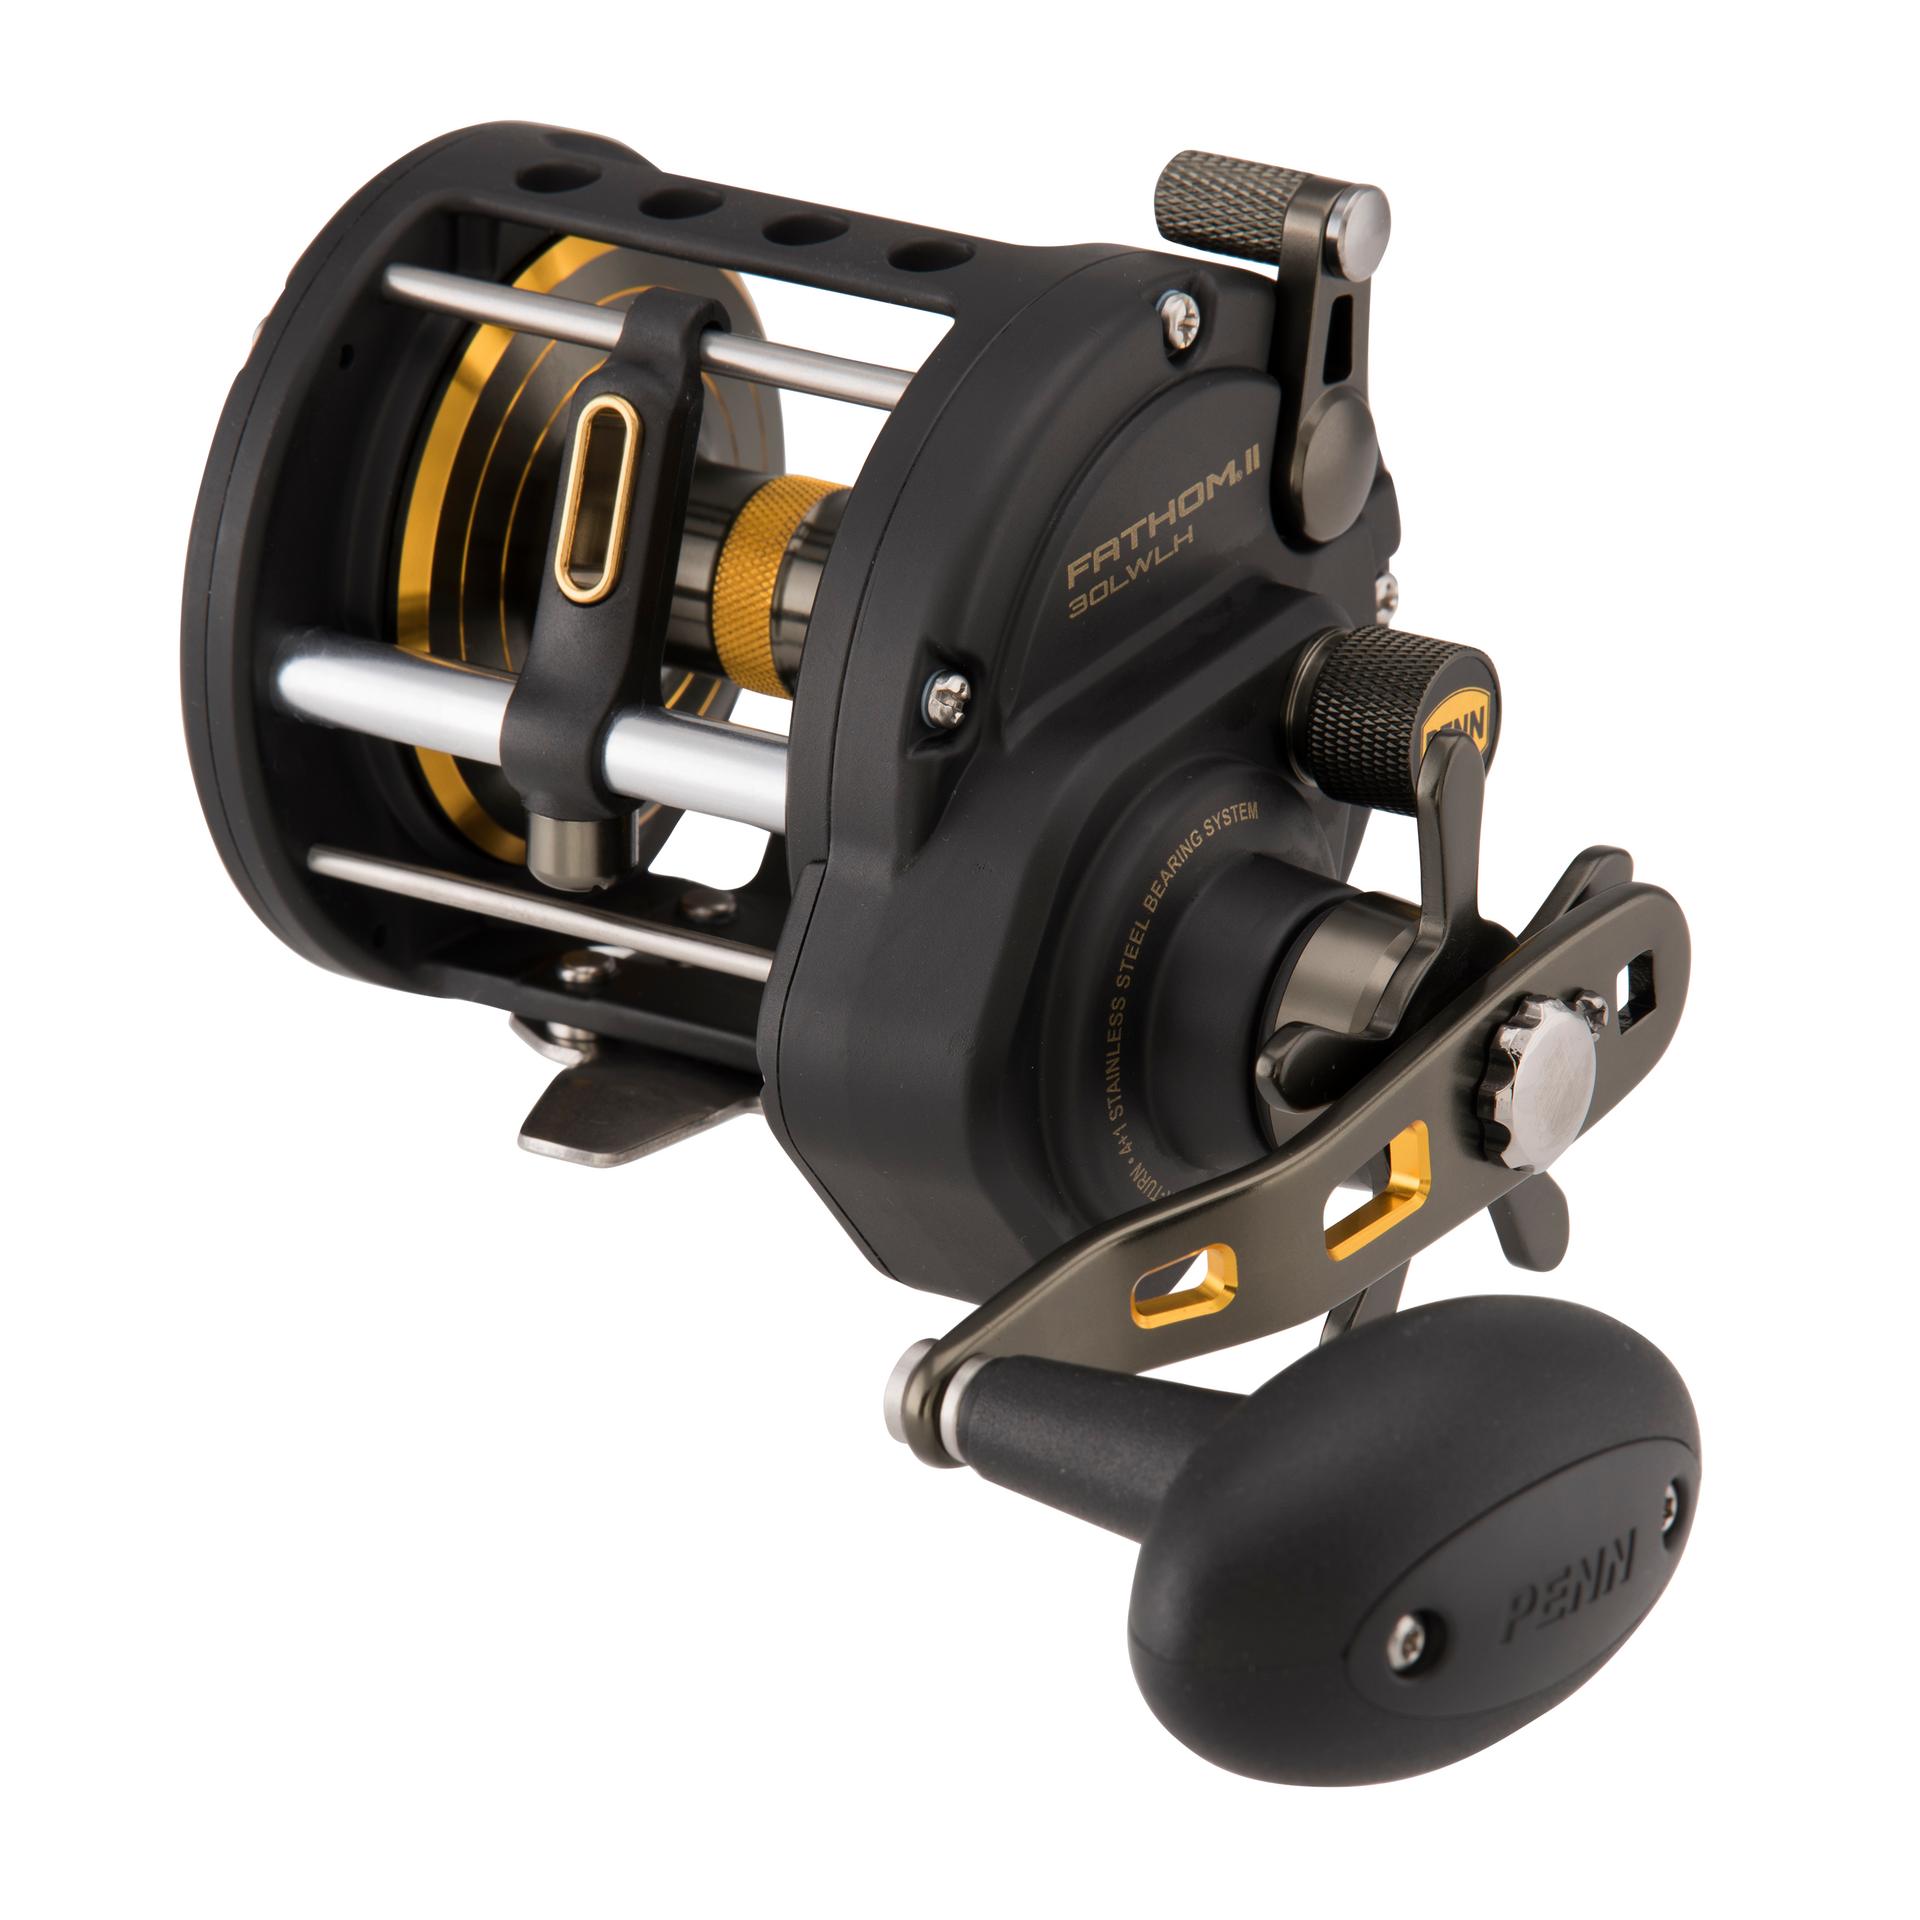 PENN Defiance 20LW Level-Wind Conventional Fishing Reel Saltwater  Freshwater 